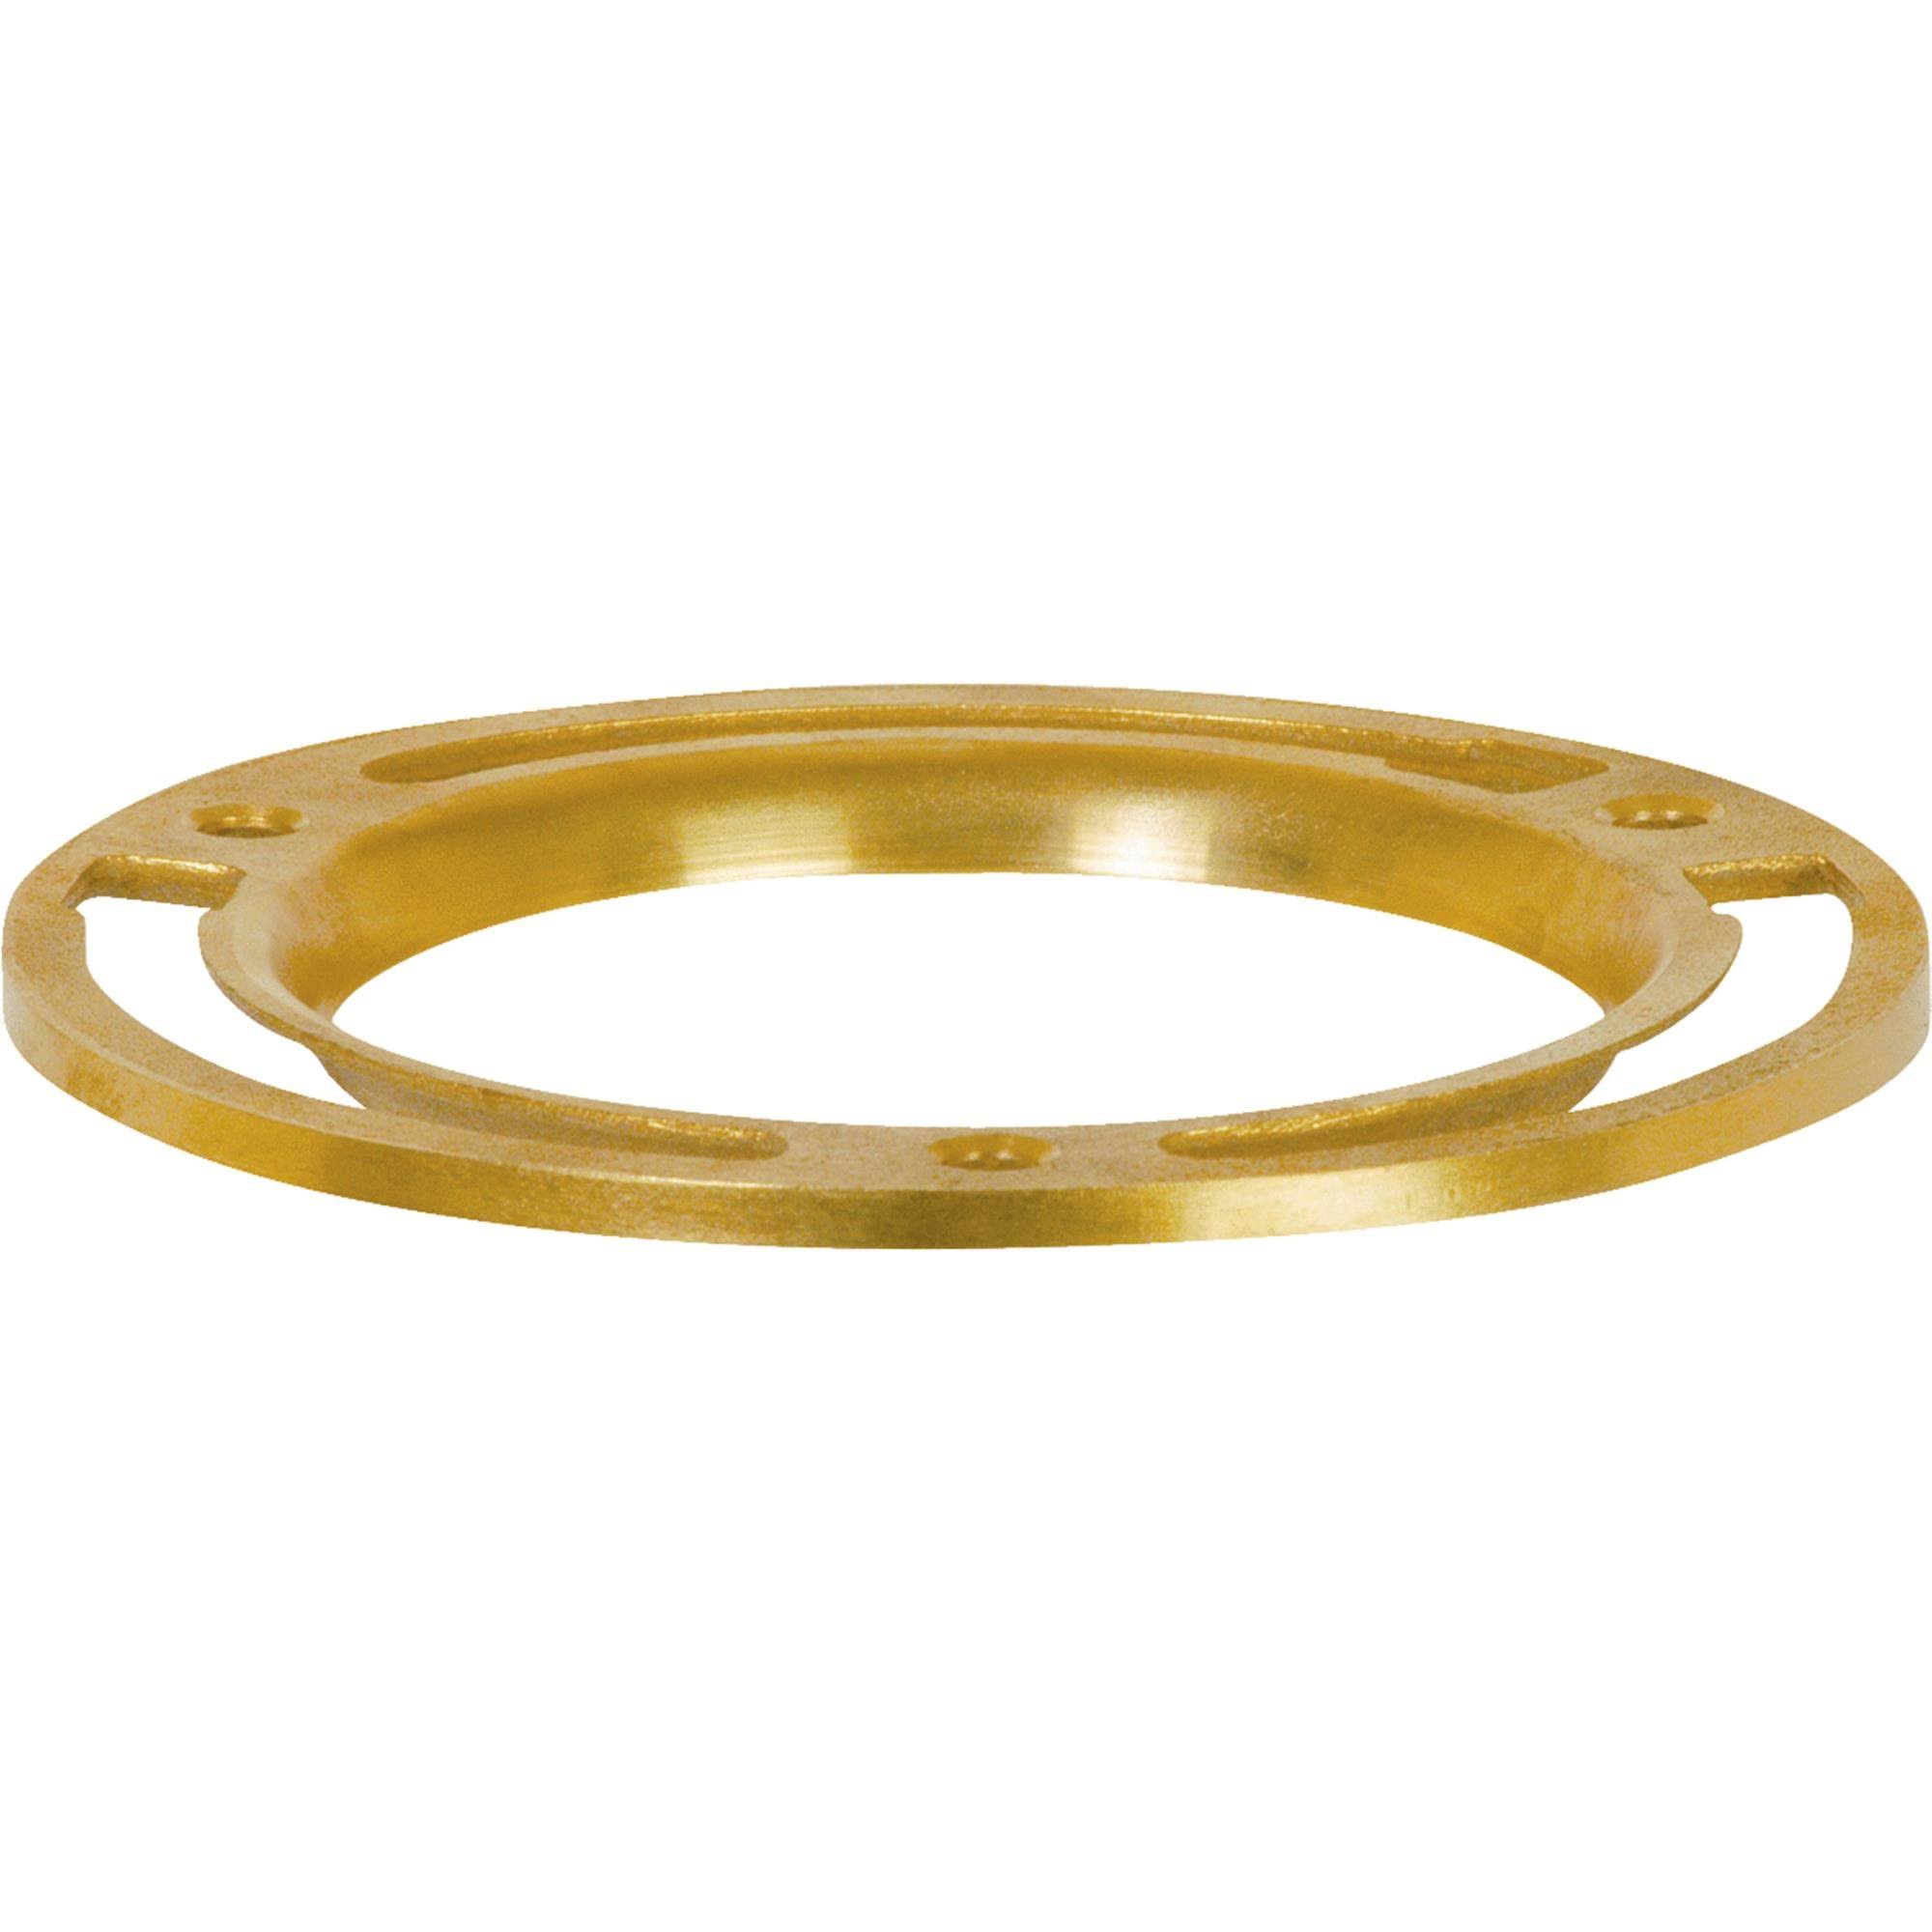 Sioux Chief Brass Toilet Flange Ring - 7"